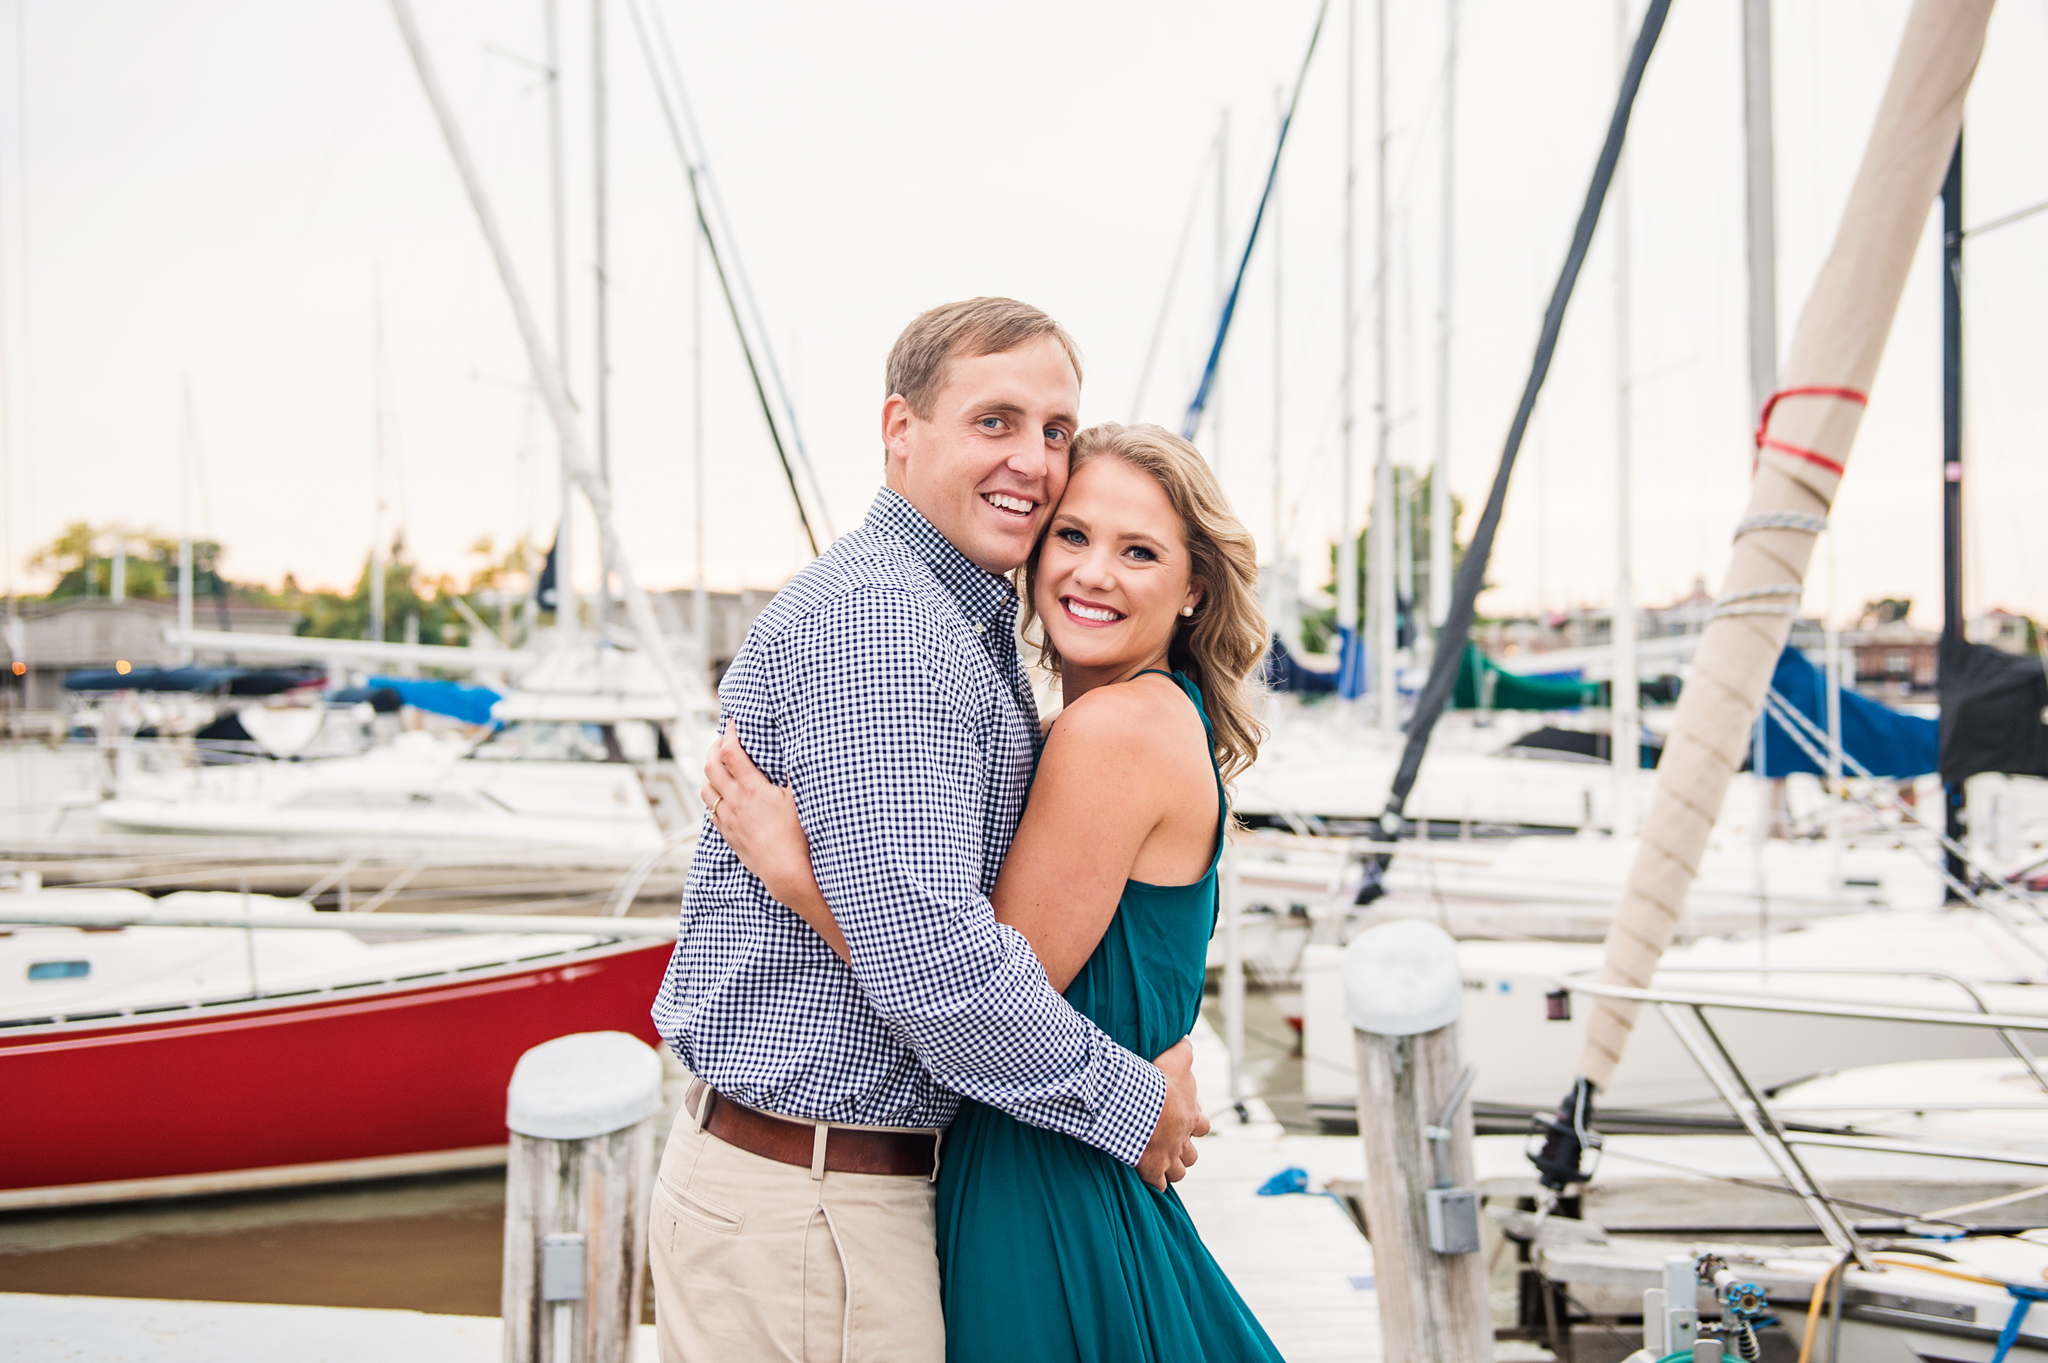 George_Eastman_House_Rochester_Yacht_Club_Rochester_Engagement_Session_JILL_STUDIO_Rochester_NY_Photographer_DSC_8175.jpg